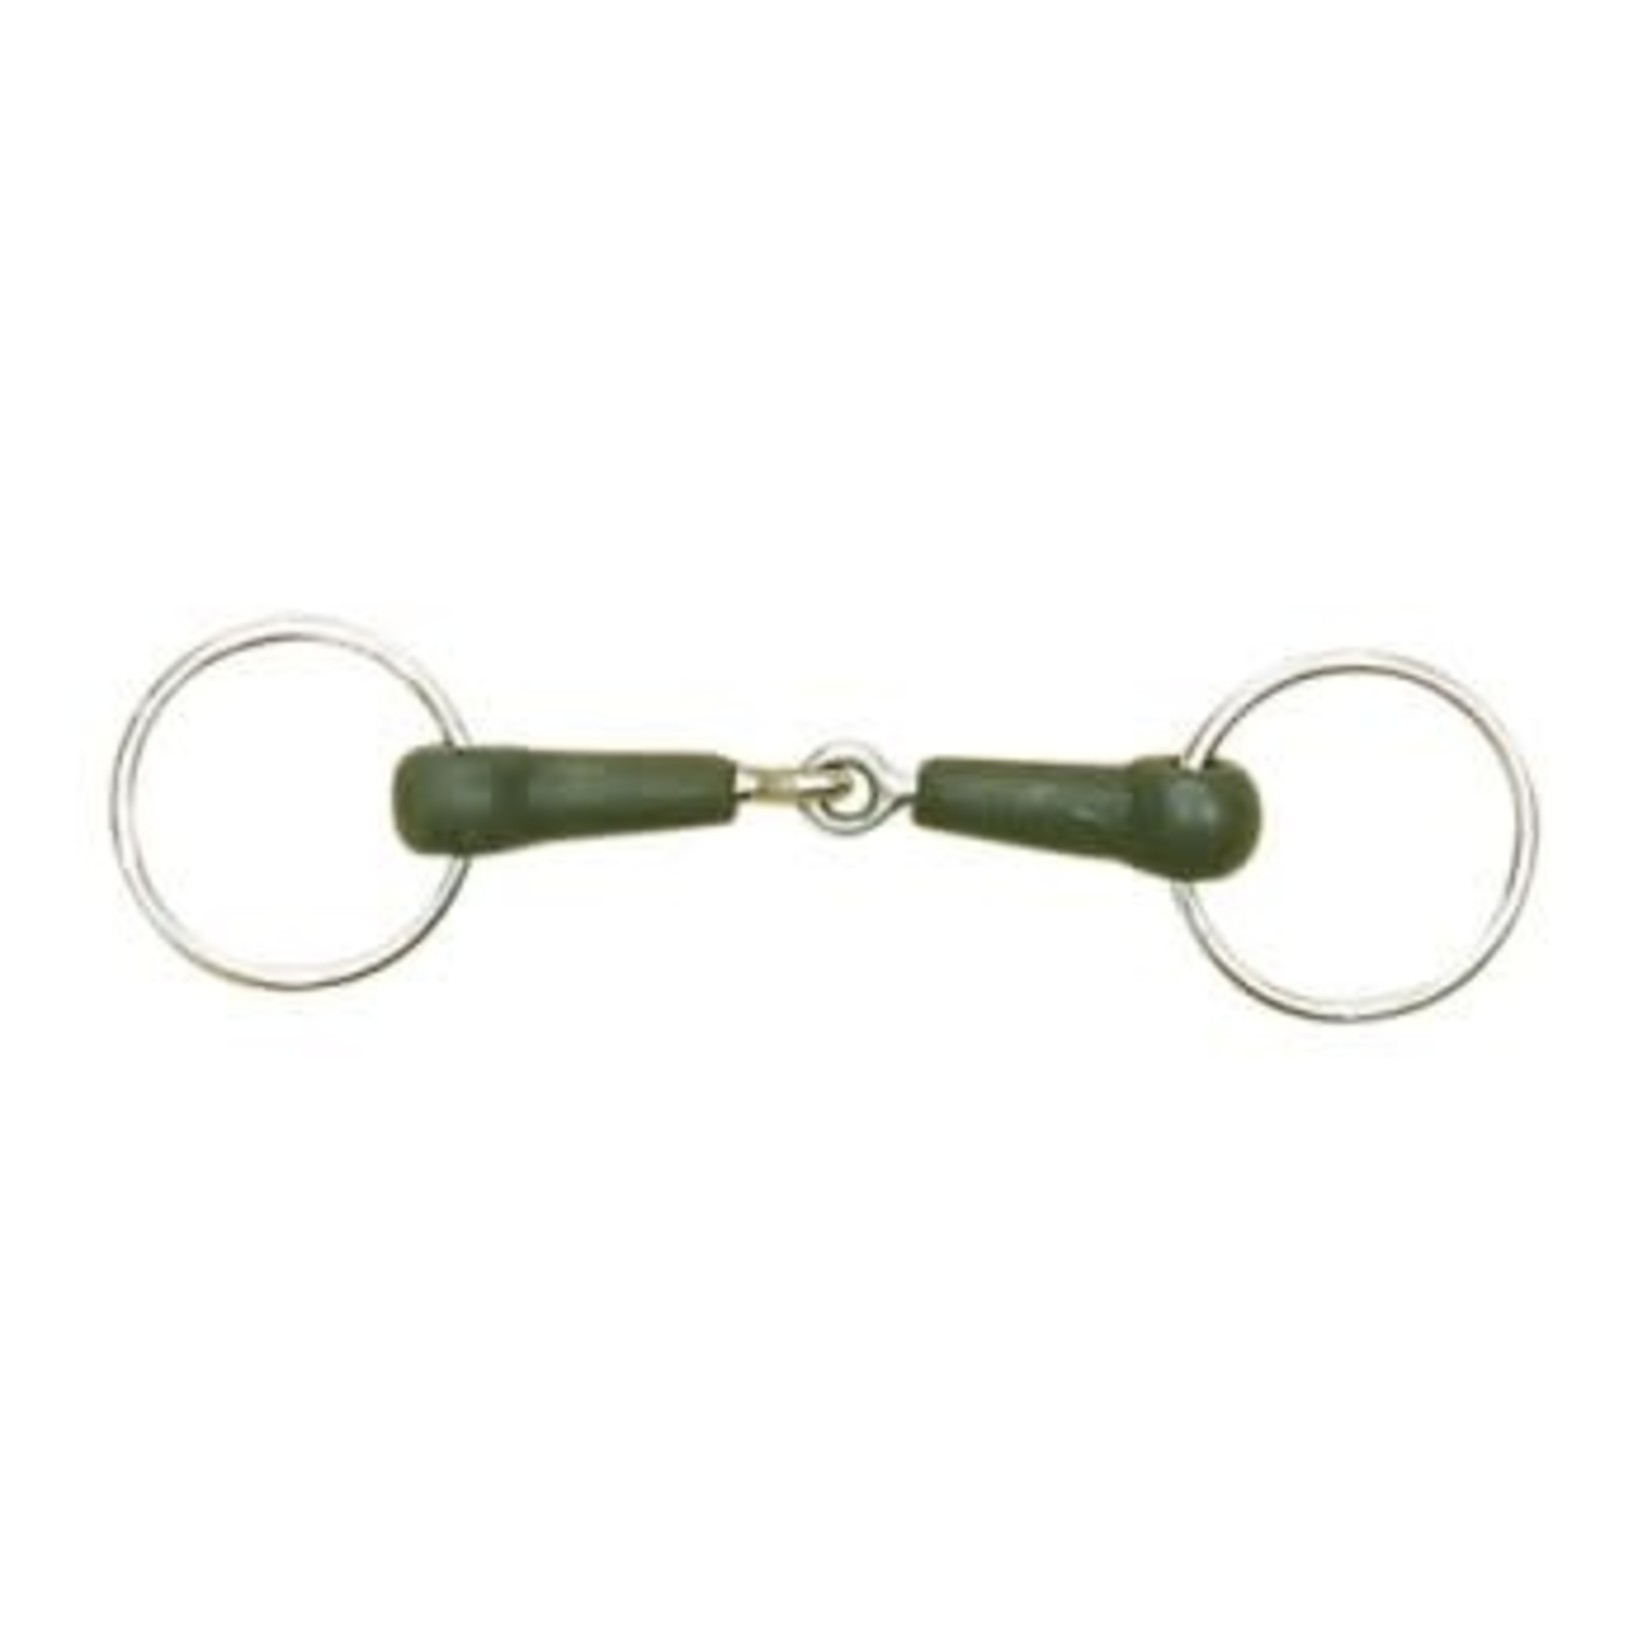 Cavalier Cavalier Loose Ring Rubber Mouth Snaffle